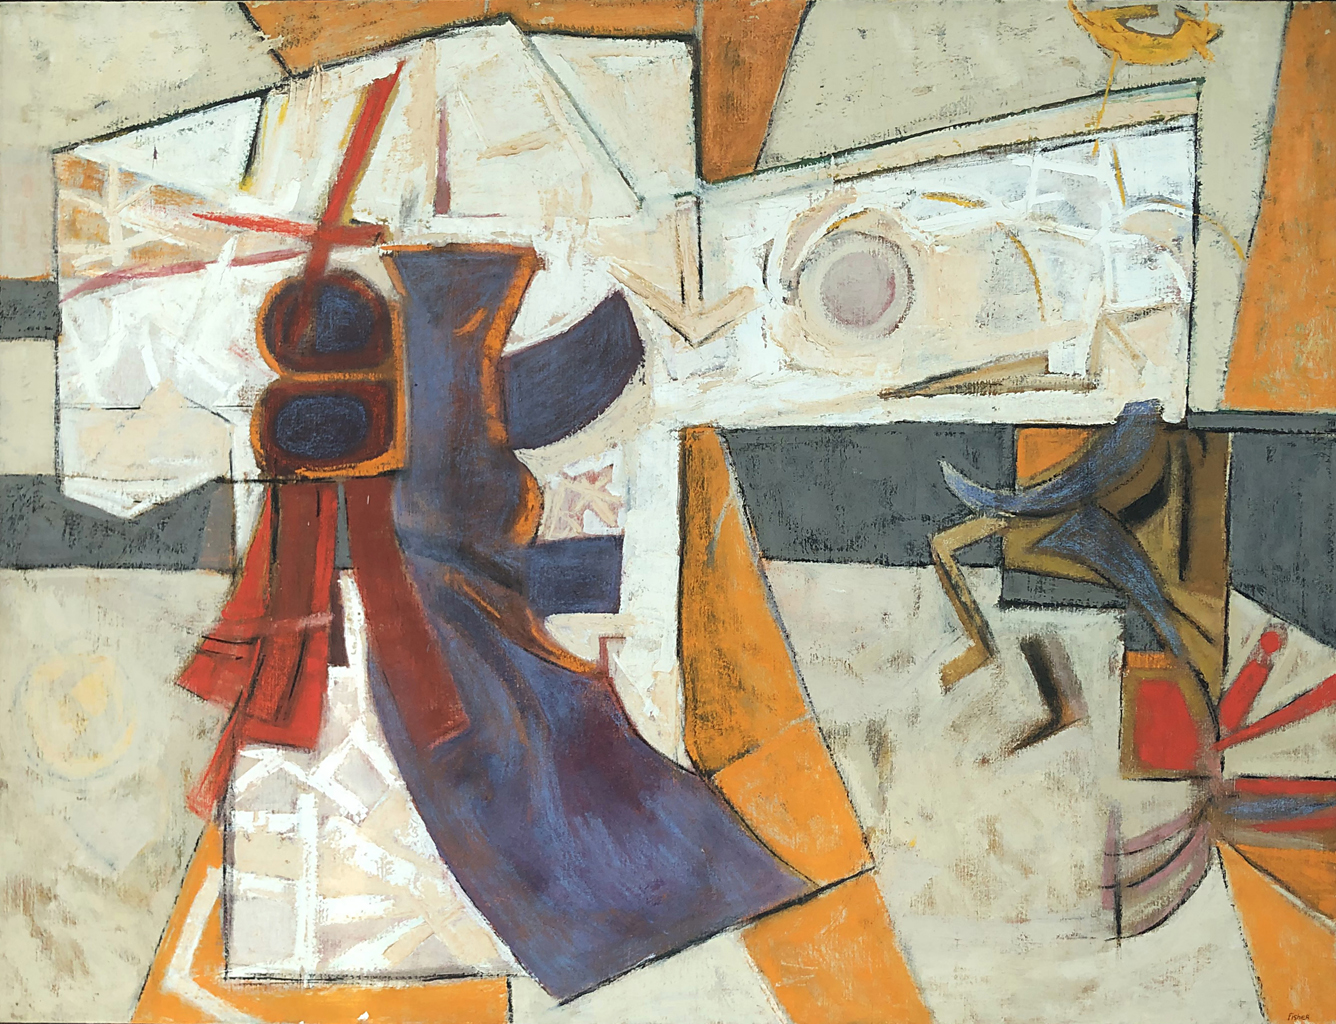 The Trove: Abstract Painting by Ethel Fisher, 1957, oil on canvas, 34 x 42 inches, mid-twentieth century abstract painting, widely exhibited in Havana, Cuba.